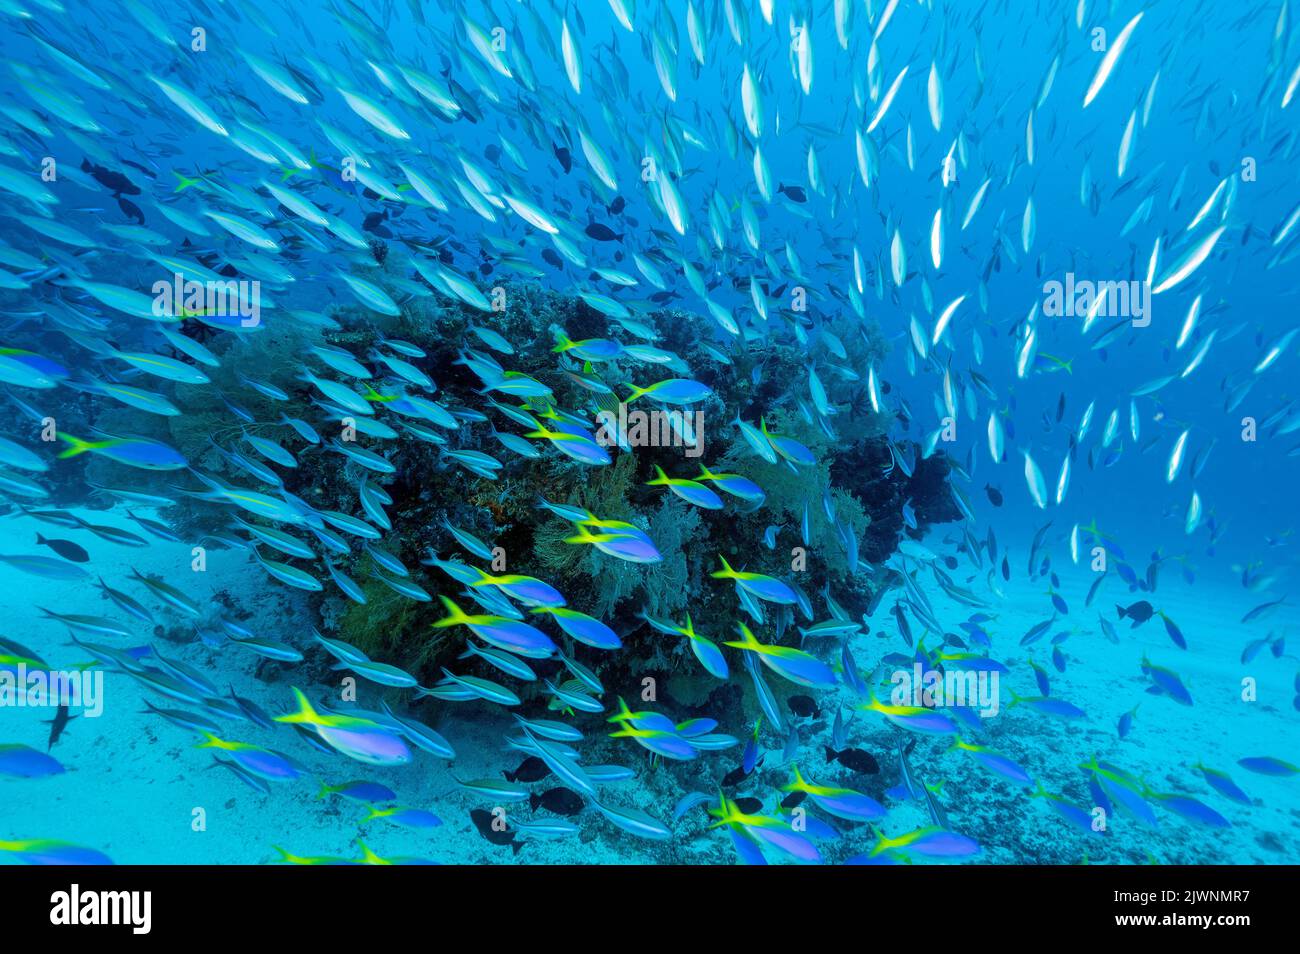 Reef scenic with massive fusiliers and surgeonfishes, Raja Ampat Indonesia. Stock Photo